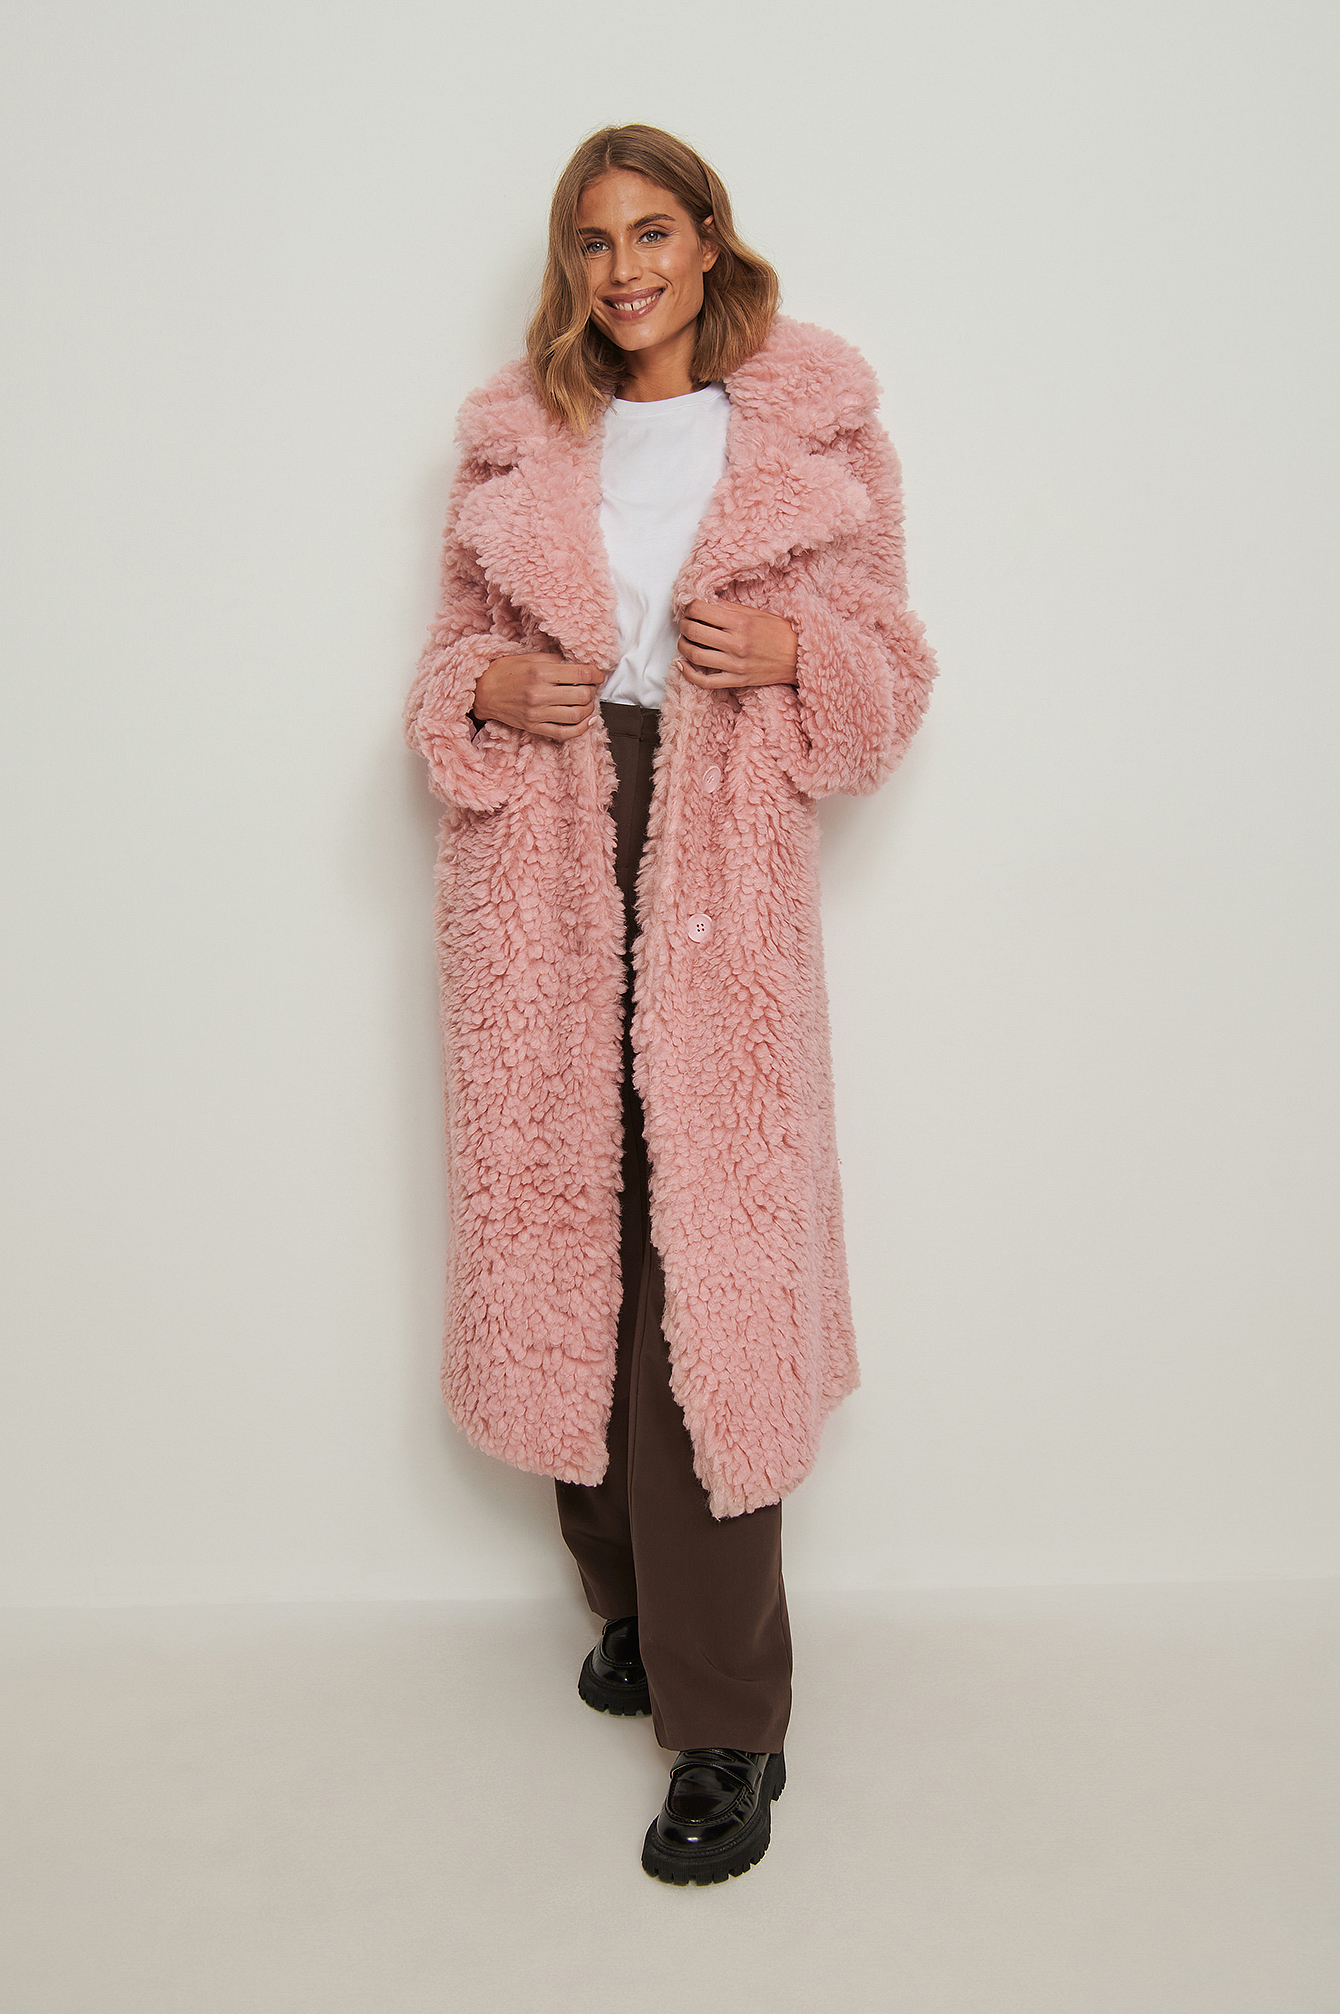 Fluffy Teddy Oversized Coat Outfit.